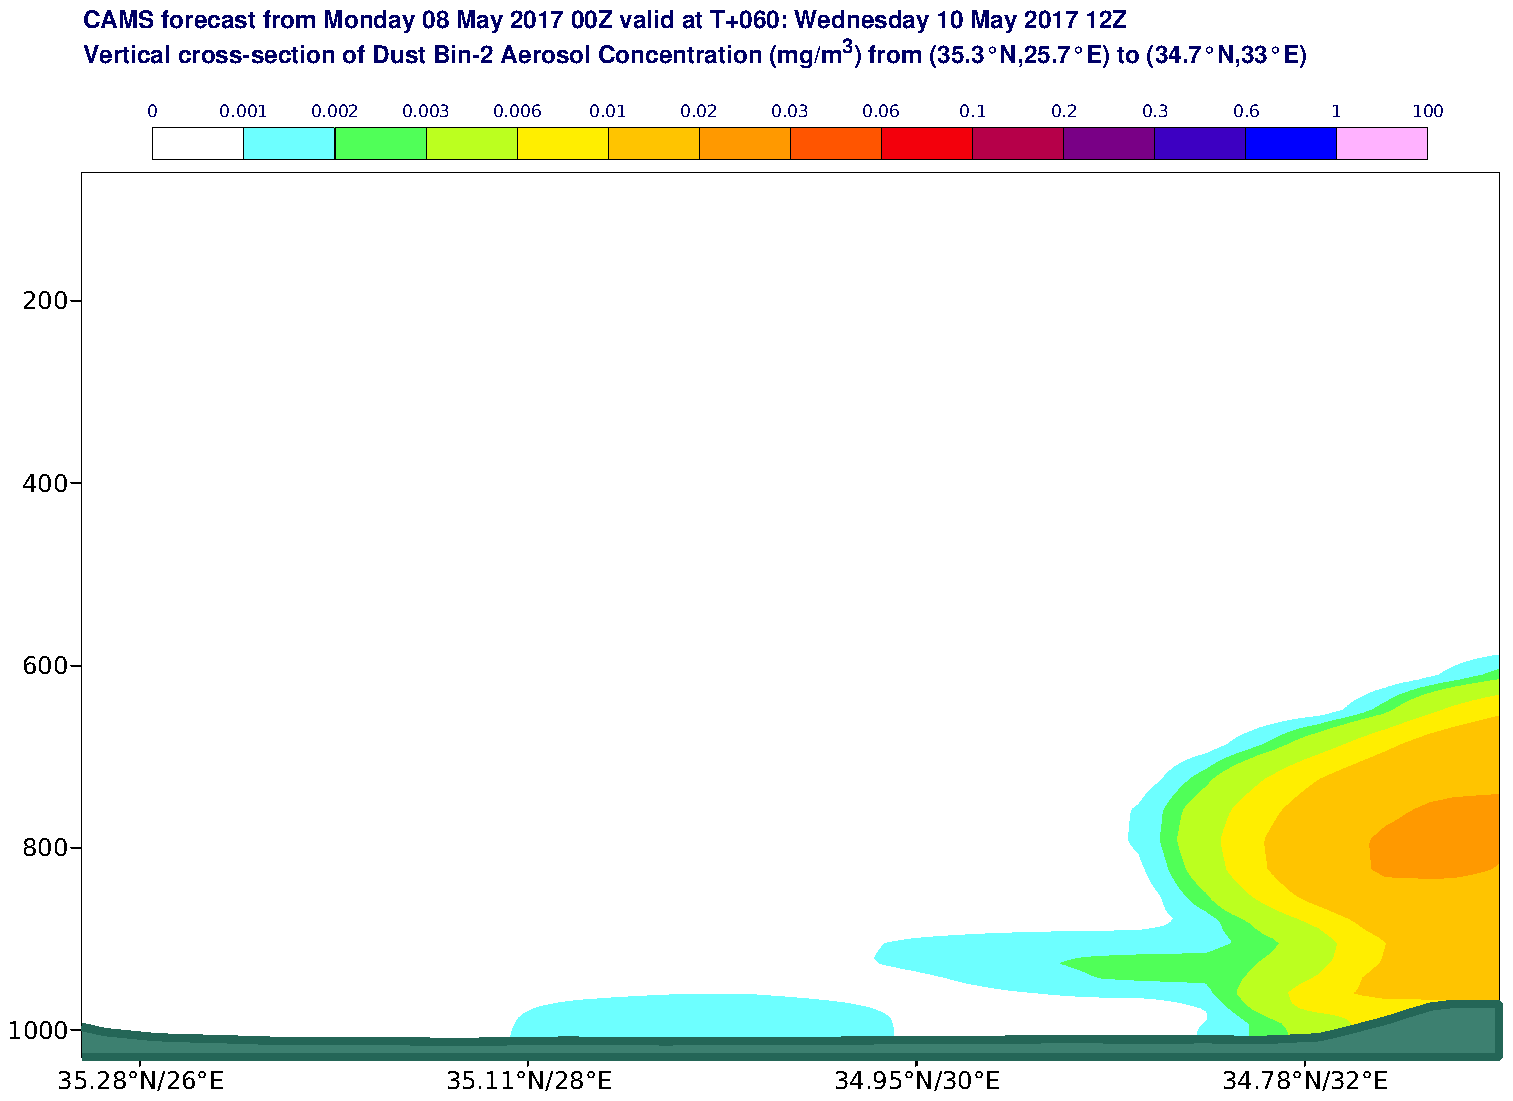 Vertical cross-section of Dust Bin-2 Aerosol Concentration (mg/m3) valid at T60 - 2017-05-10 12:00